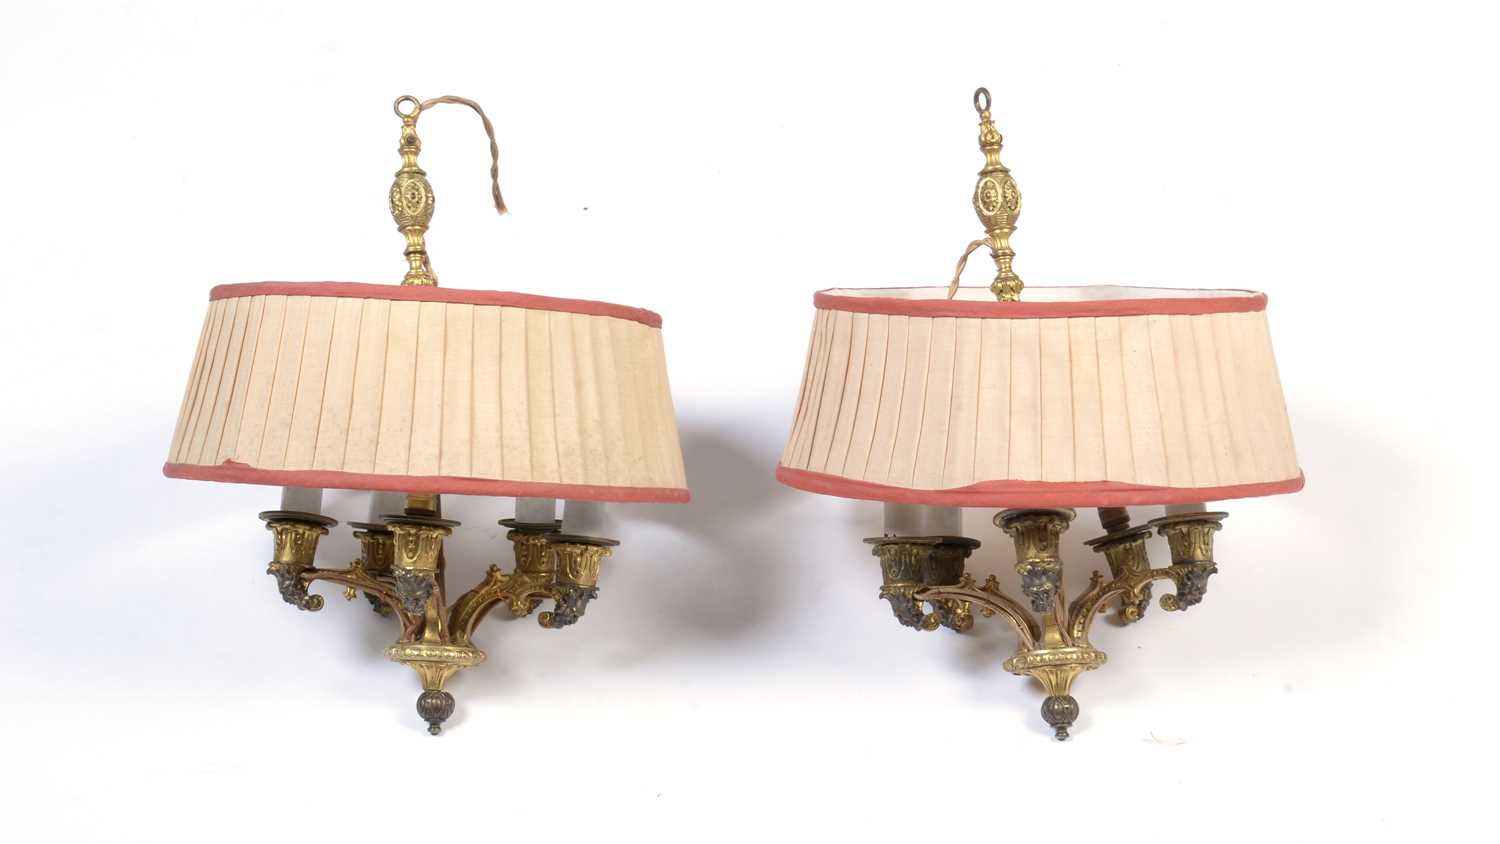 A pair of French Empire-style ormolu hanging wall lights and brackets - Image 4 of 7